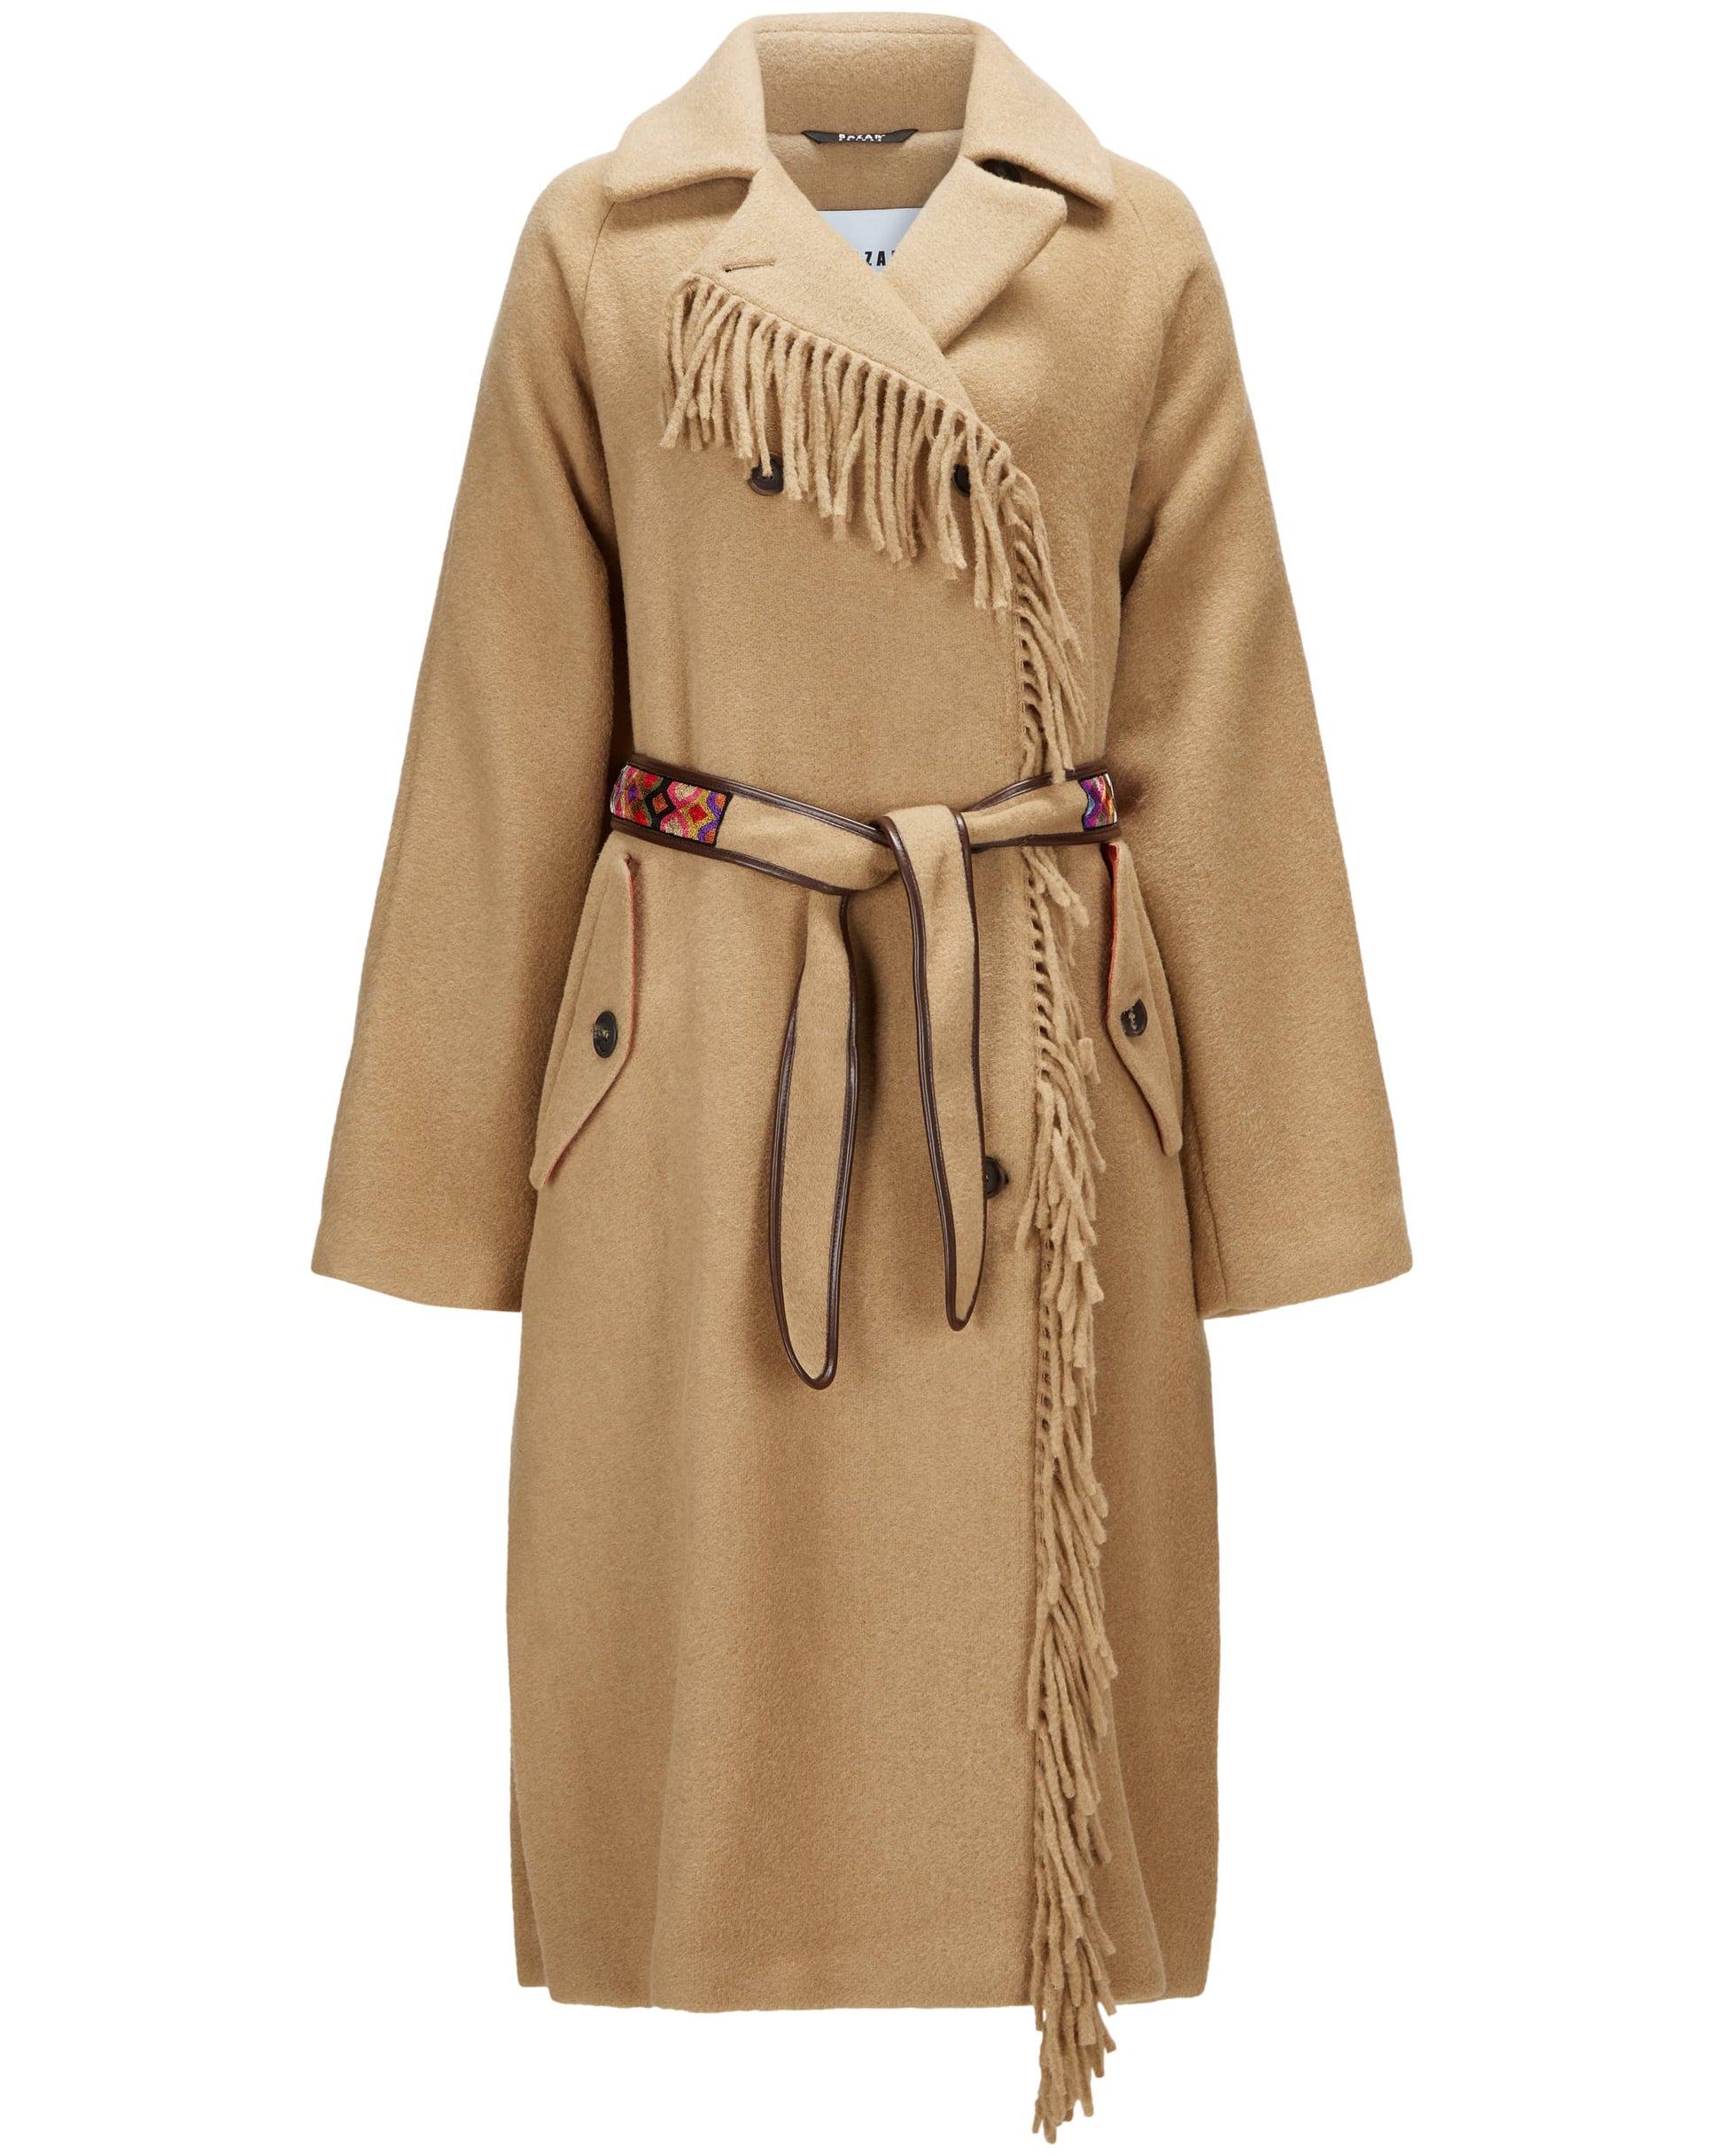 Bazar Deluxe Camel Wool Coat with Fringes